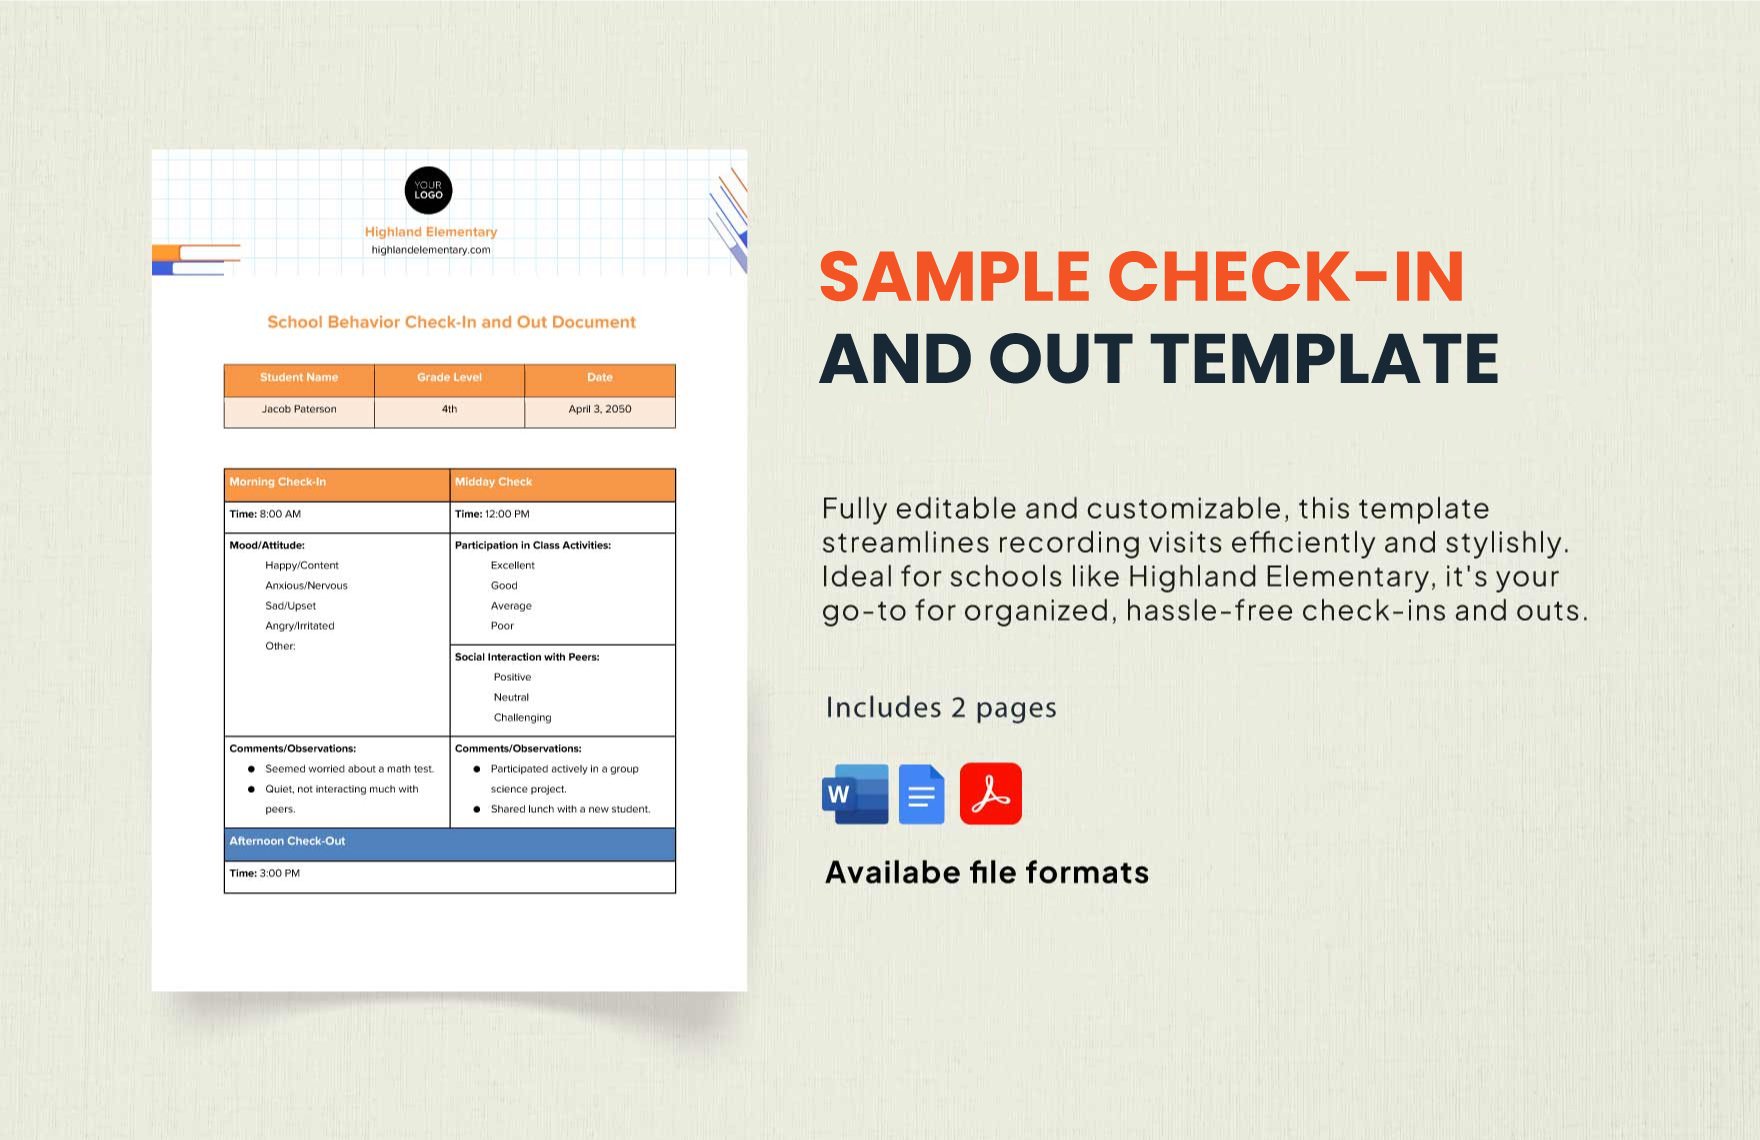 Sample Check-in and Out Template